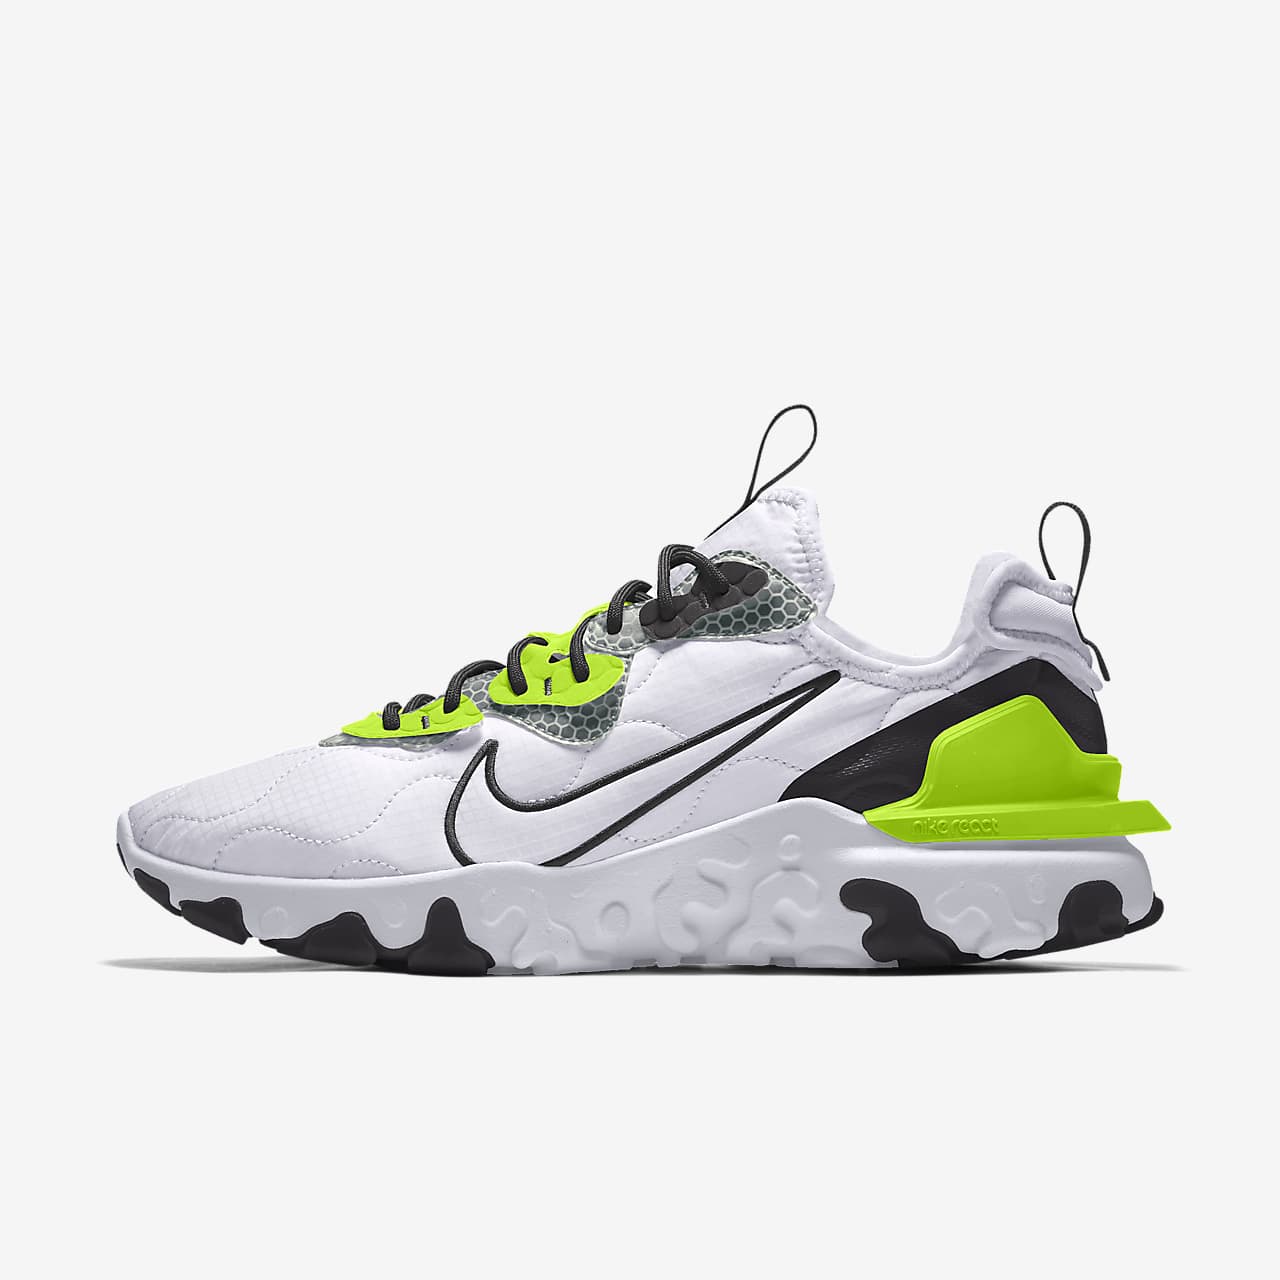 the upper of the react vision was inspired by which classic nike shoes